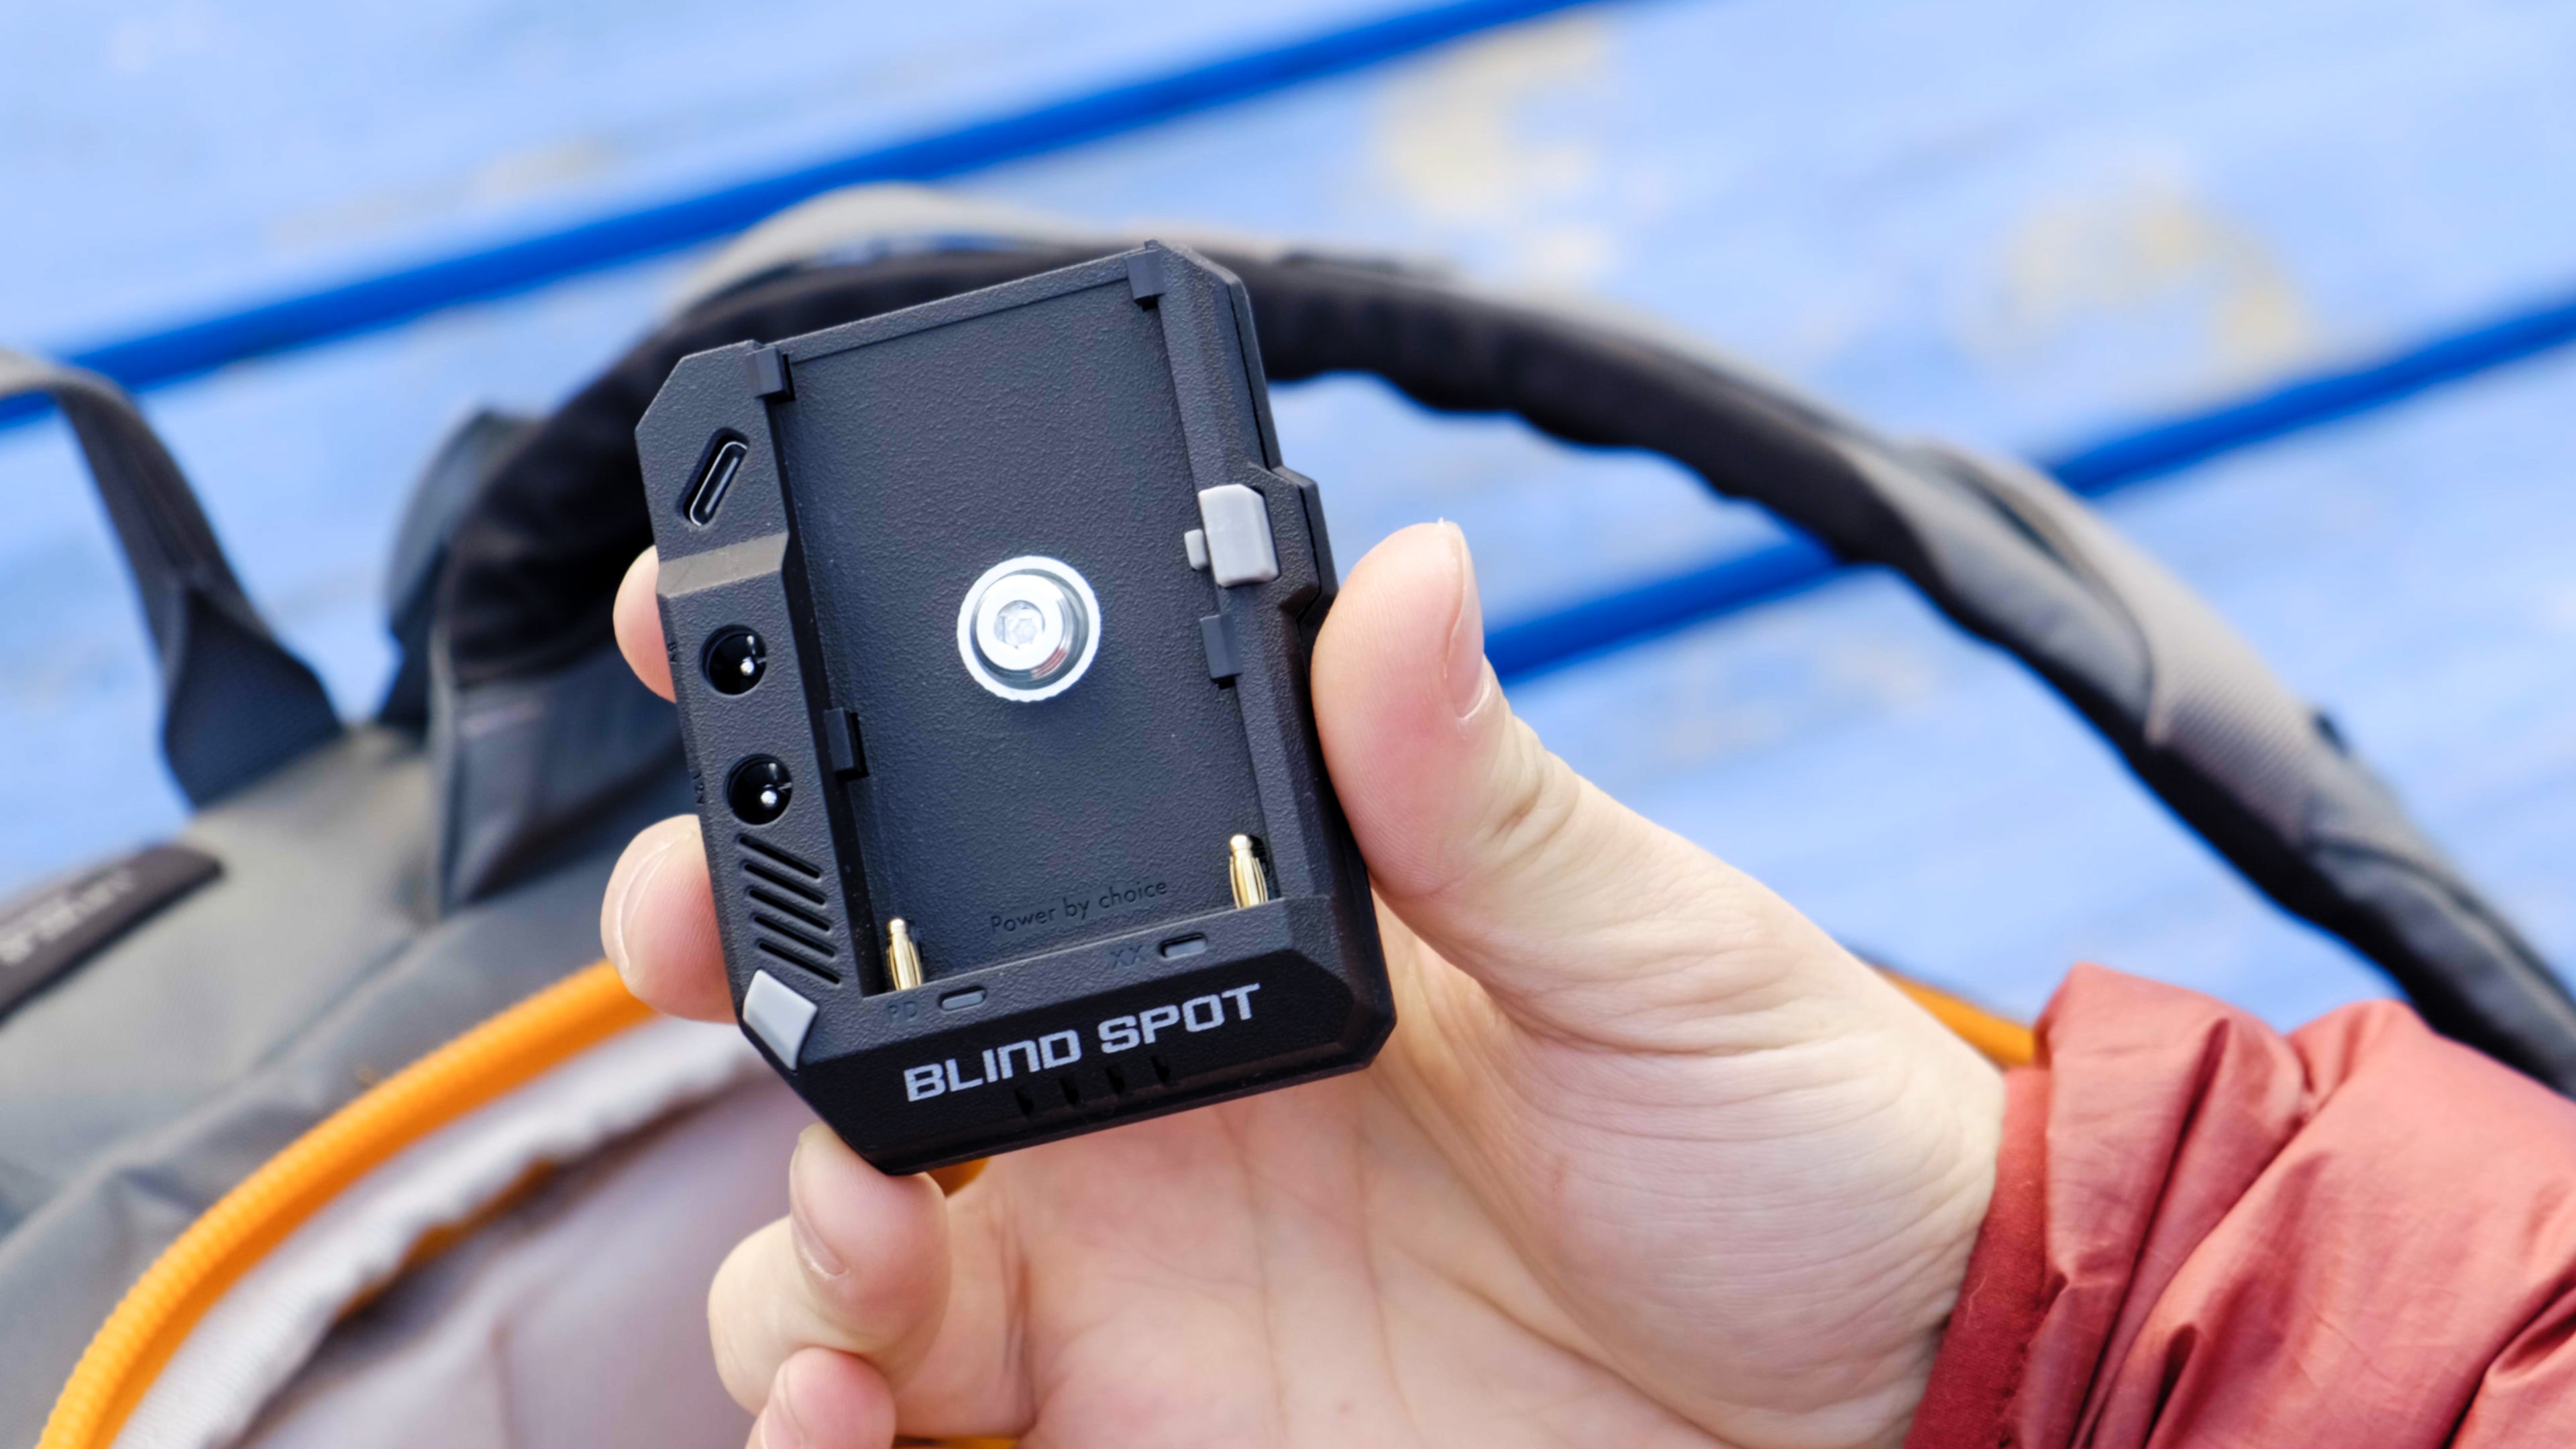 Discover the Unbeatable Pioneer in Filmmaking: The Blind Spot Power Junkie v2